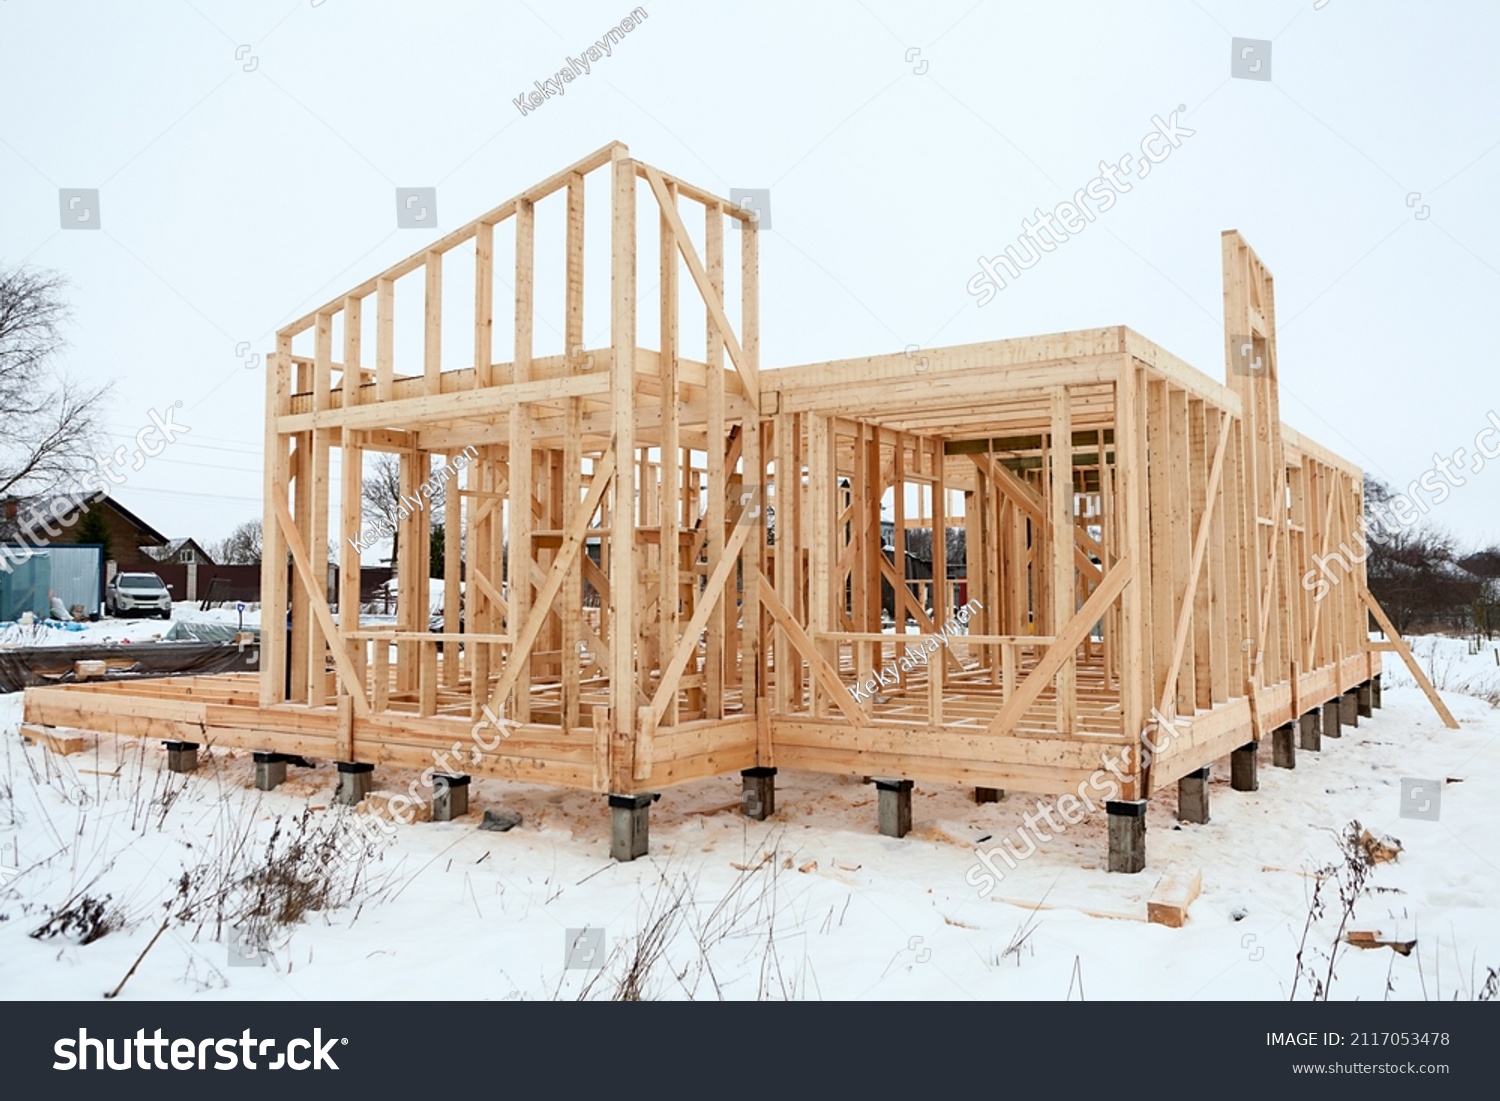 Wood frame house under construction, bare frame and walls with pile foundation, winter season #2117053478